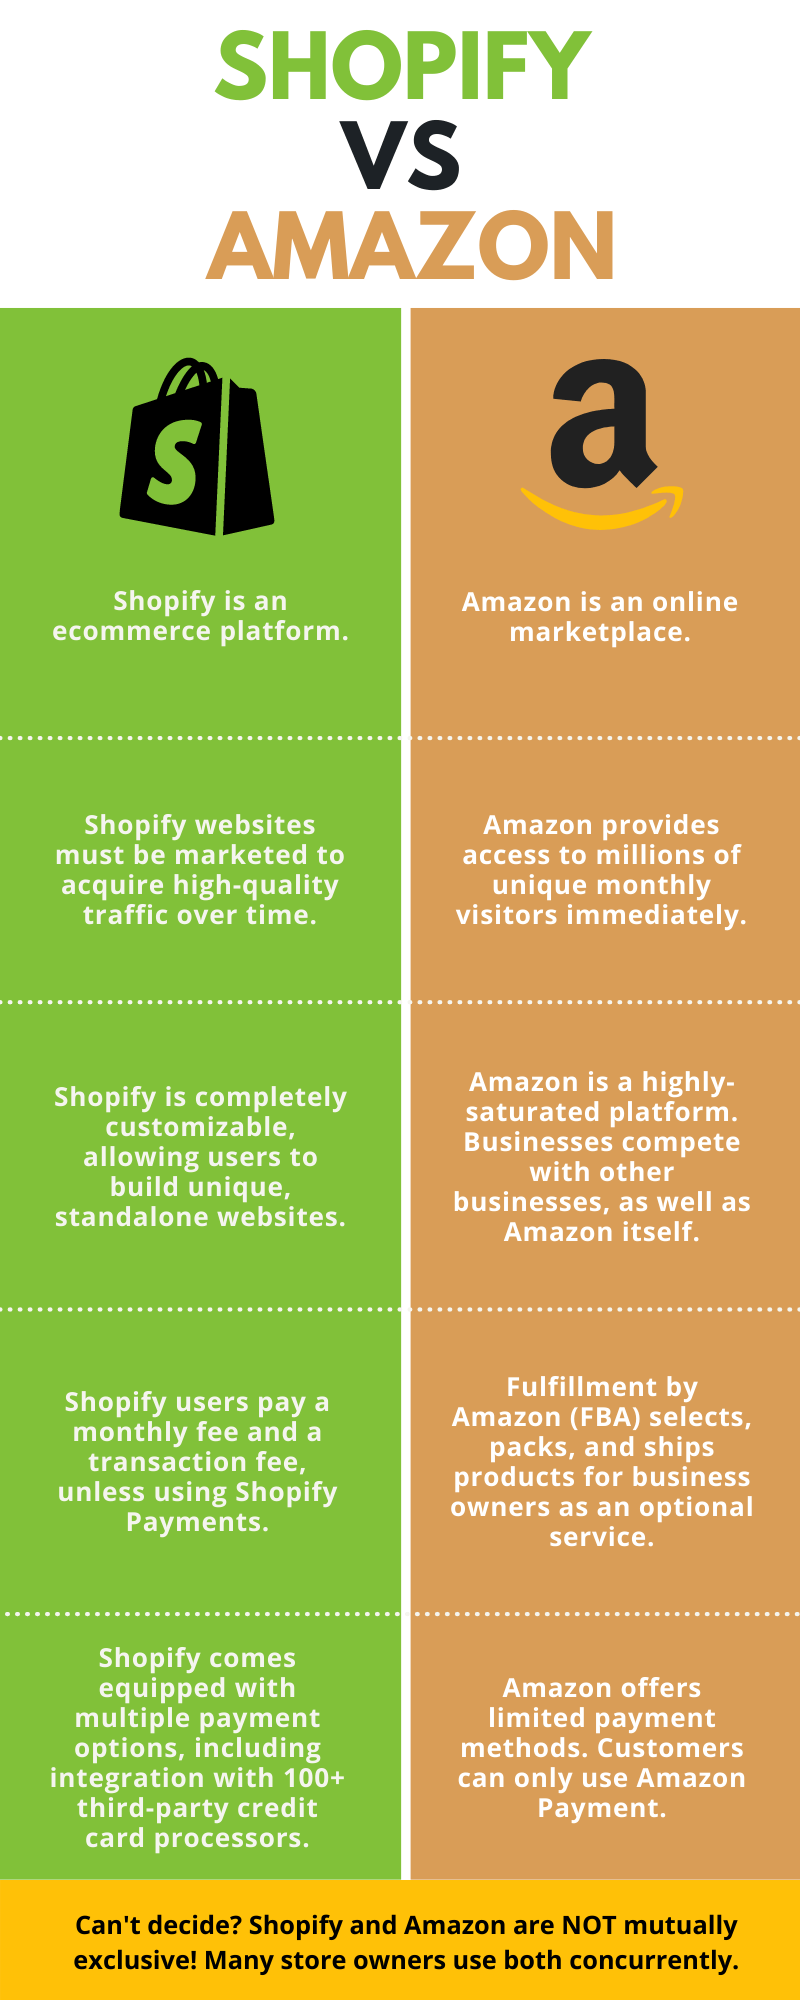 shopify vs amazon - what's the difference between amazon and shopify